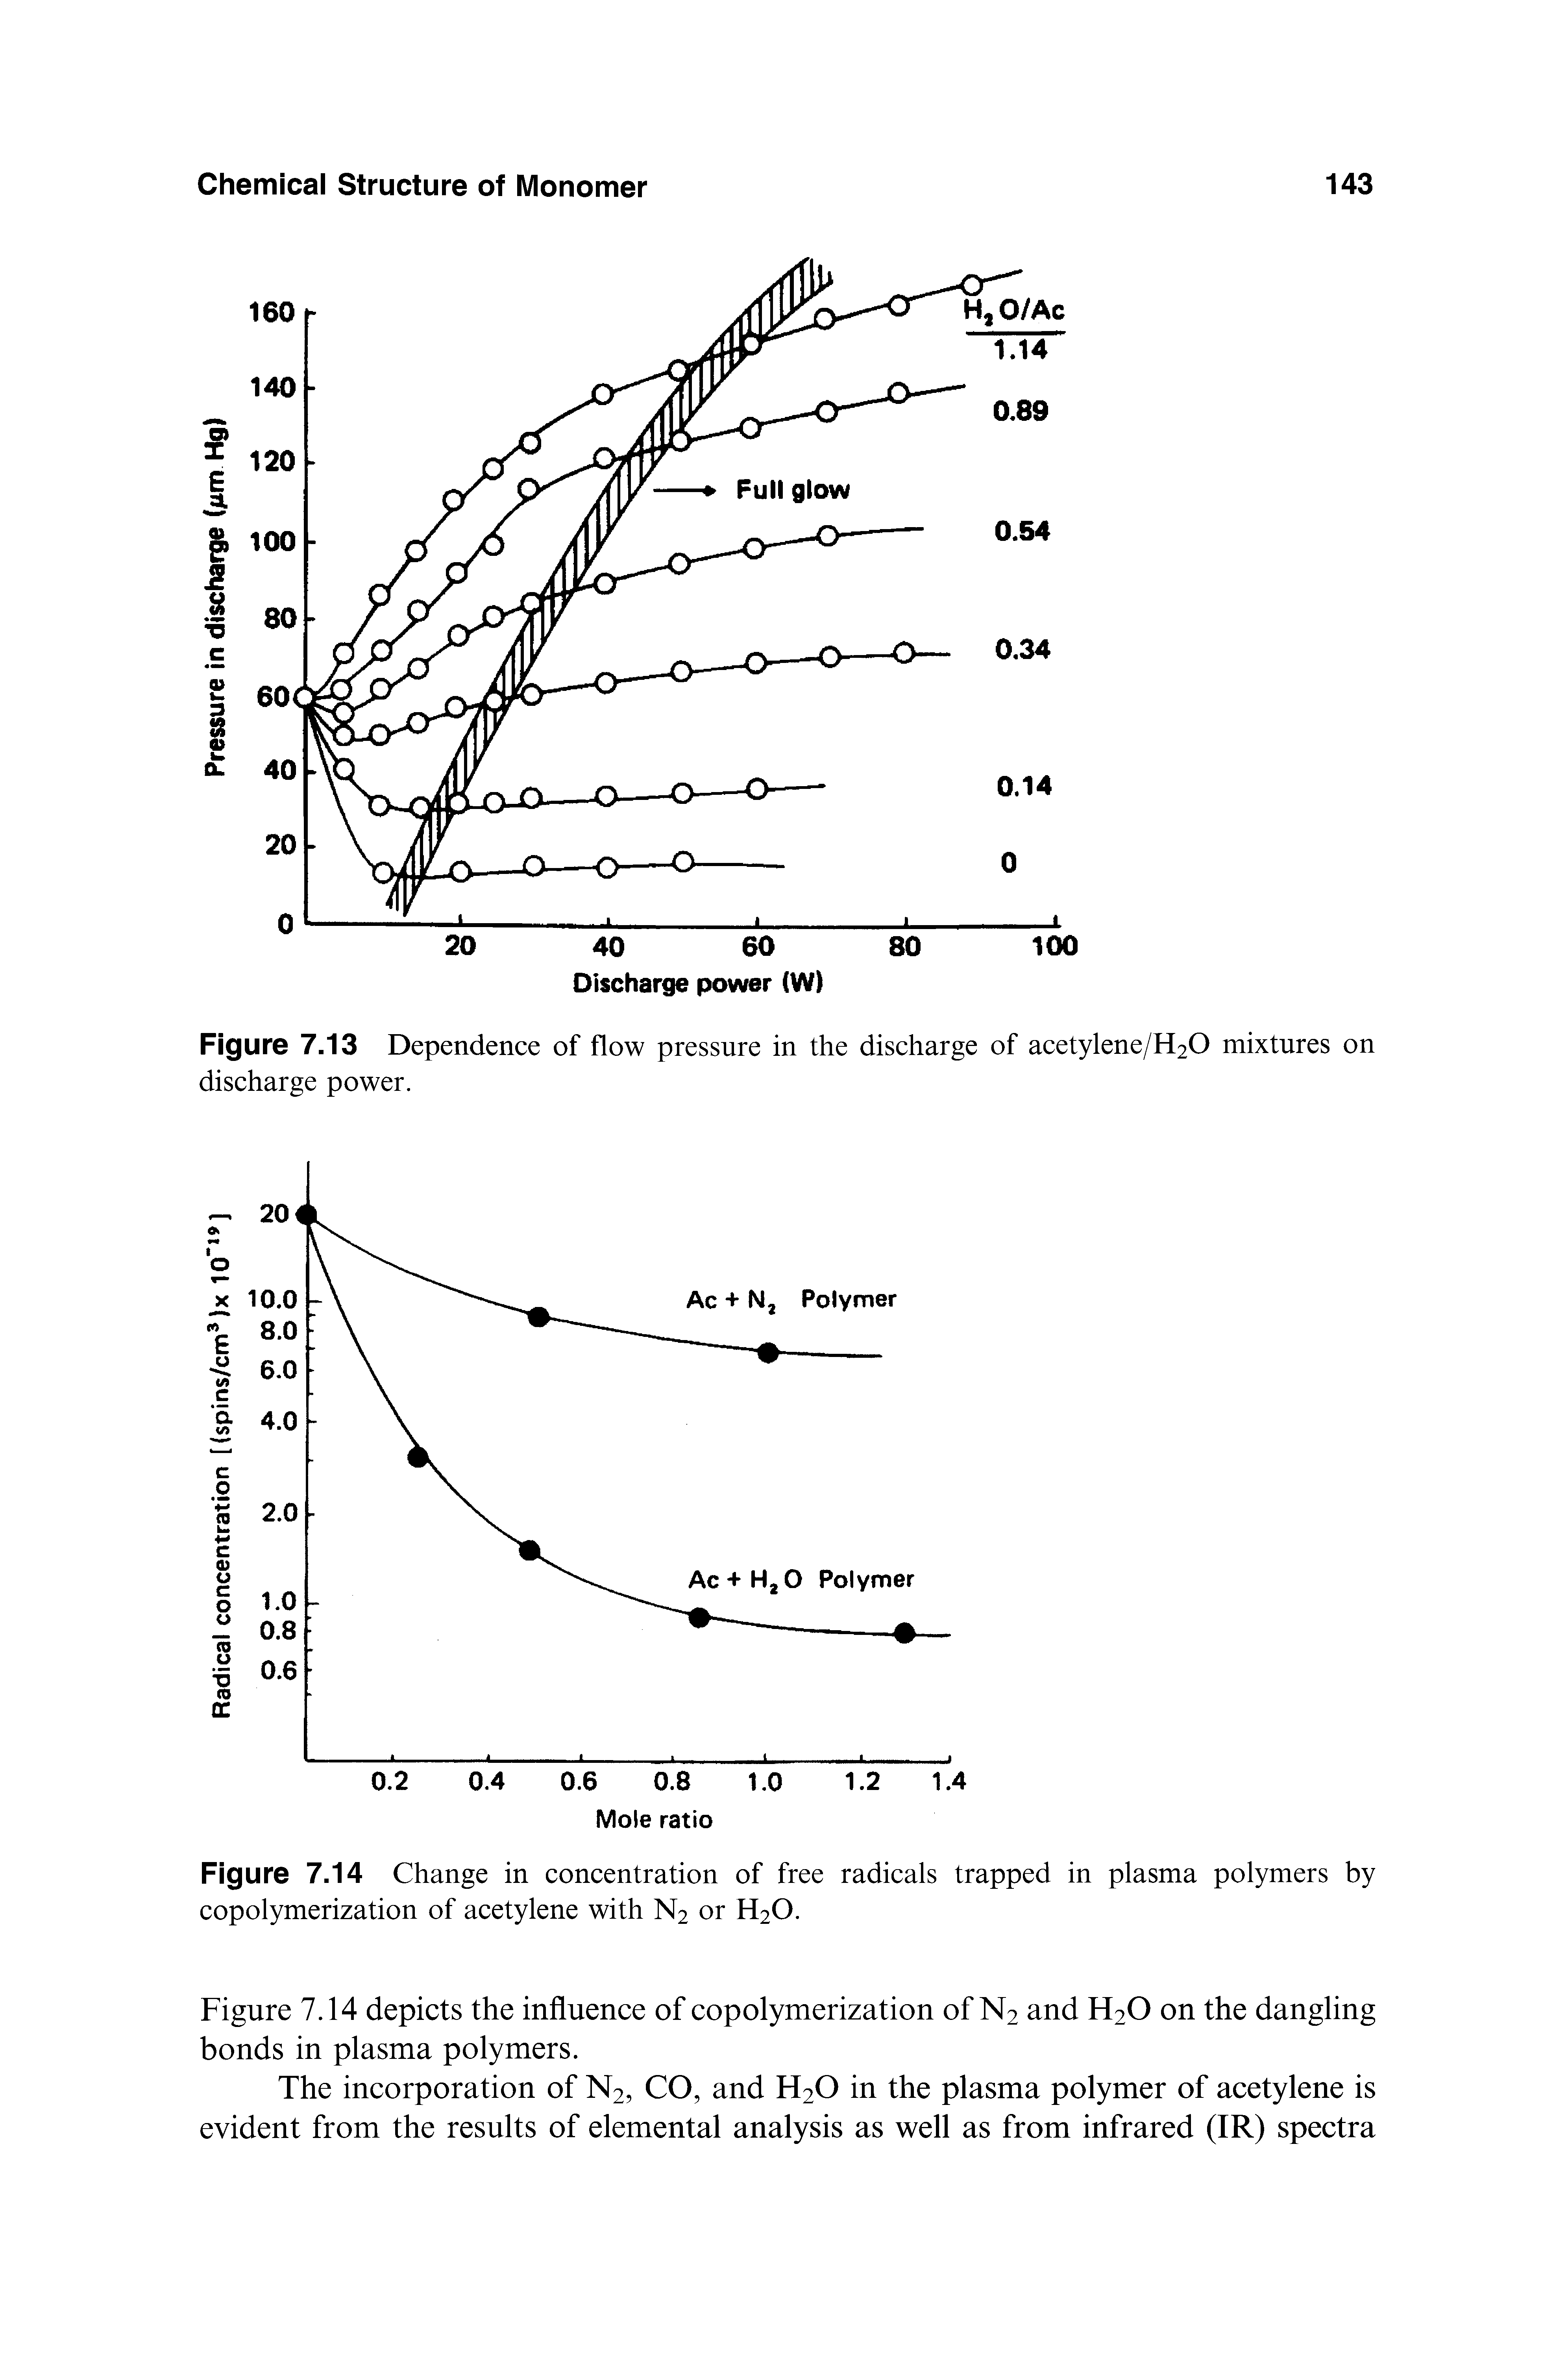 Figure 7.14 Change in concentration of free radicals trapped in plasma polymers by copolymerization of acetylene with N2 or H2O.